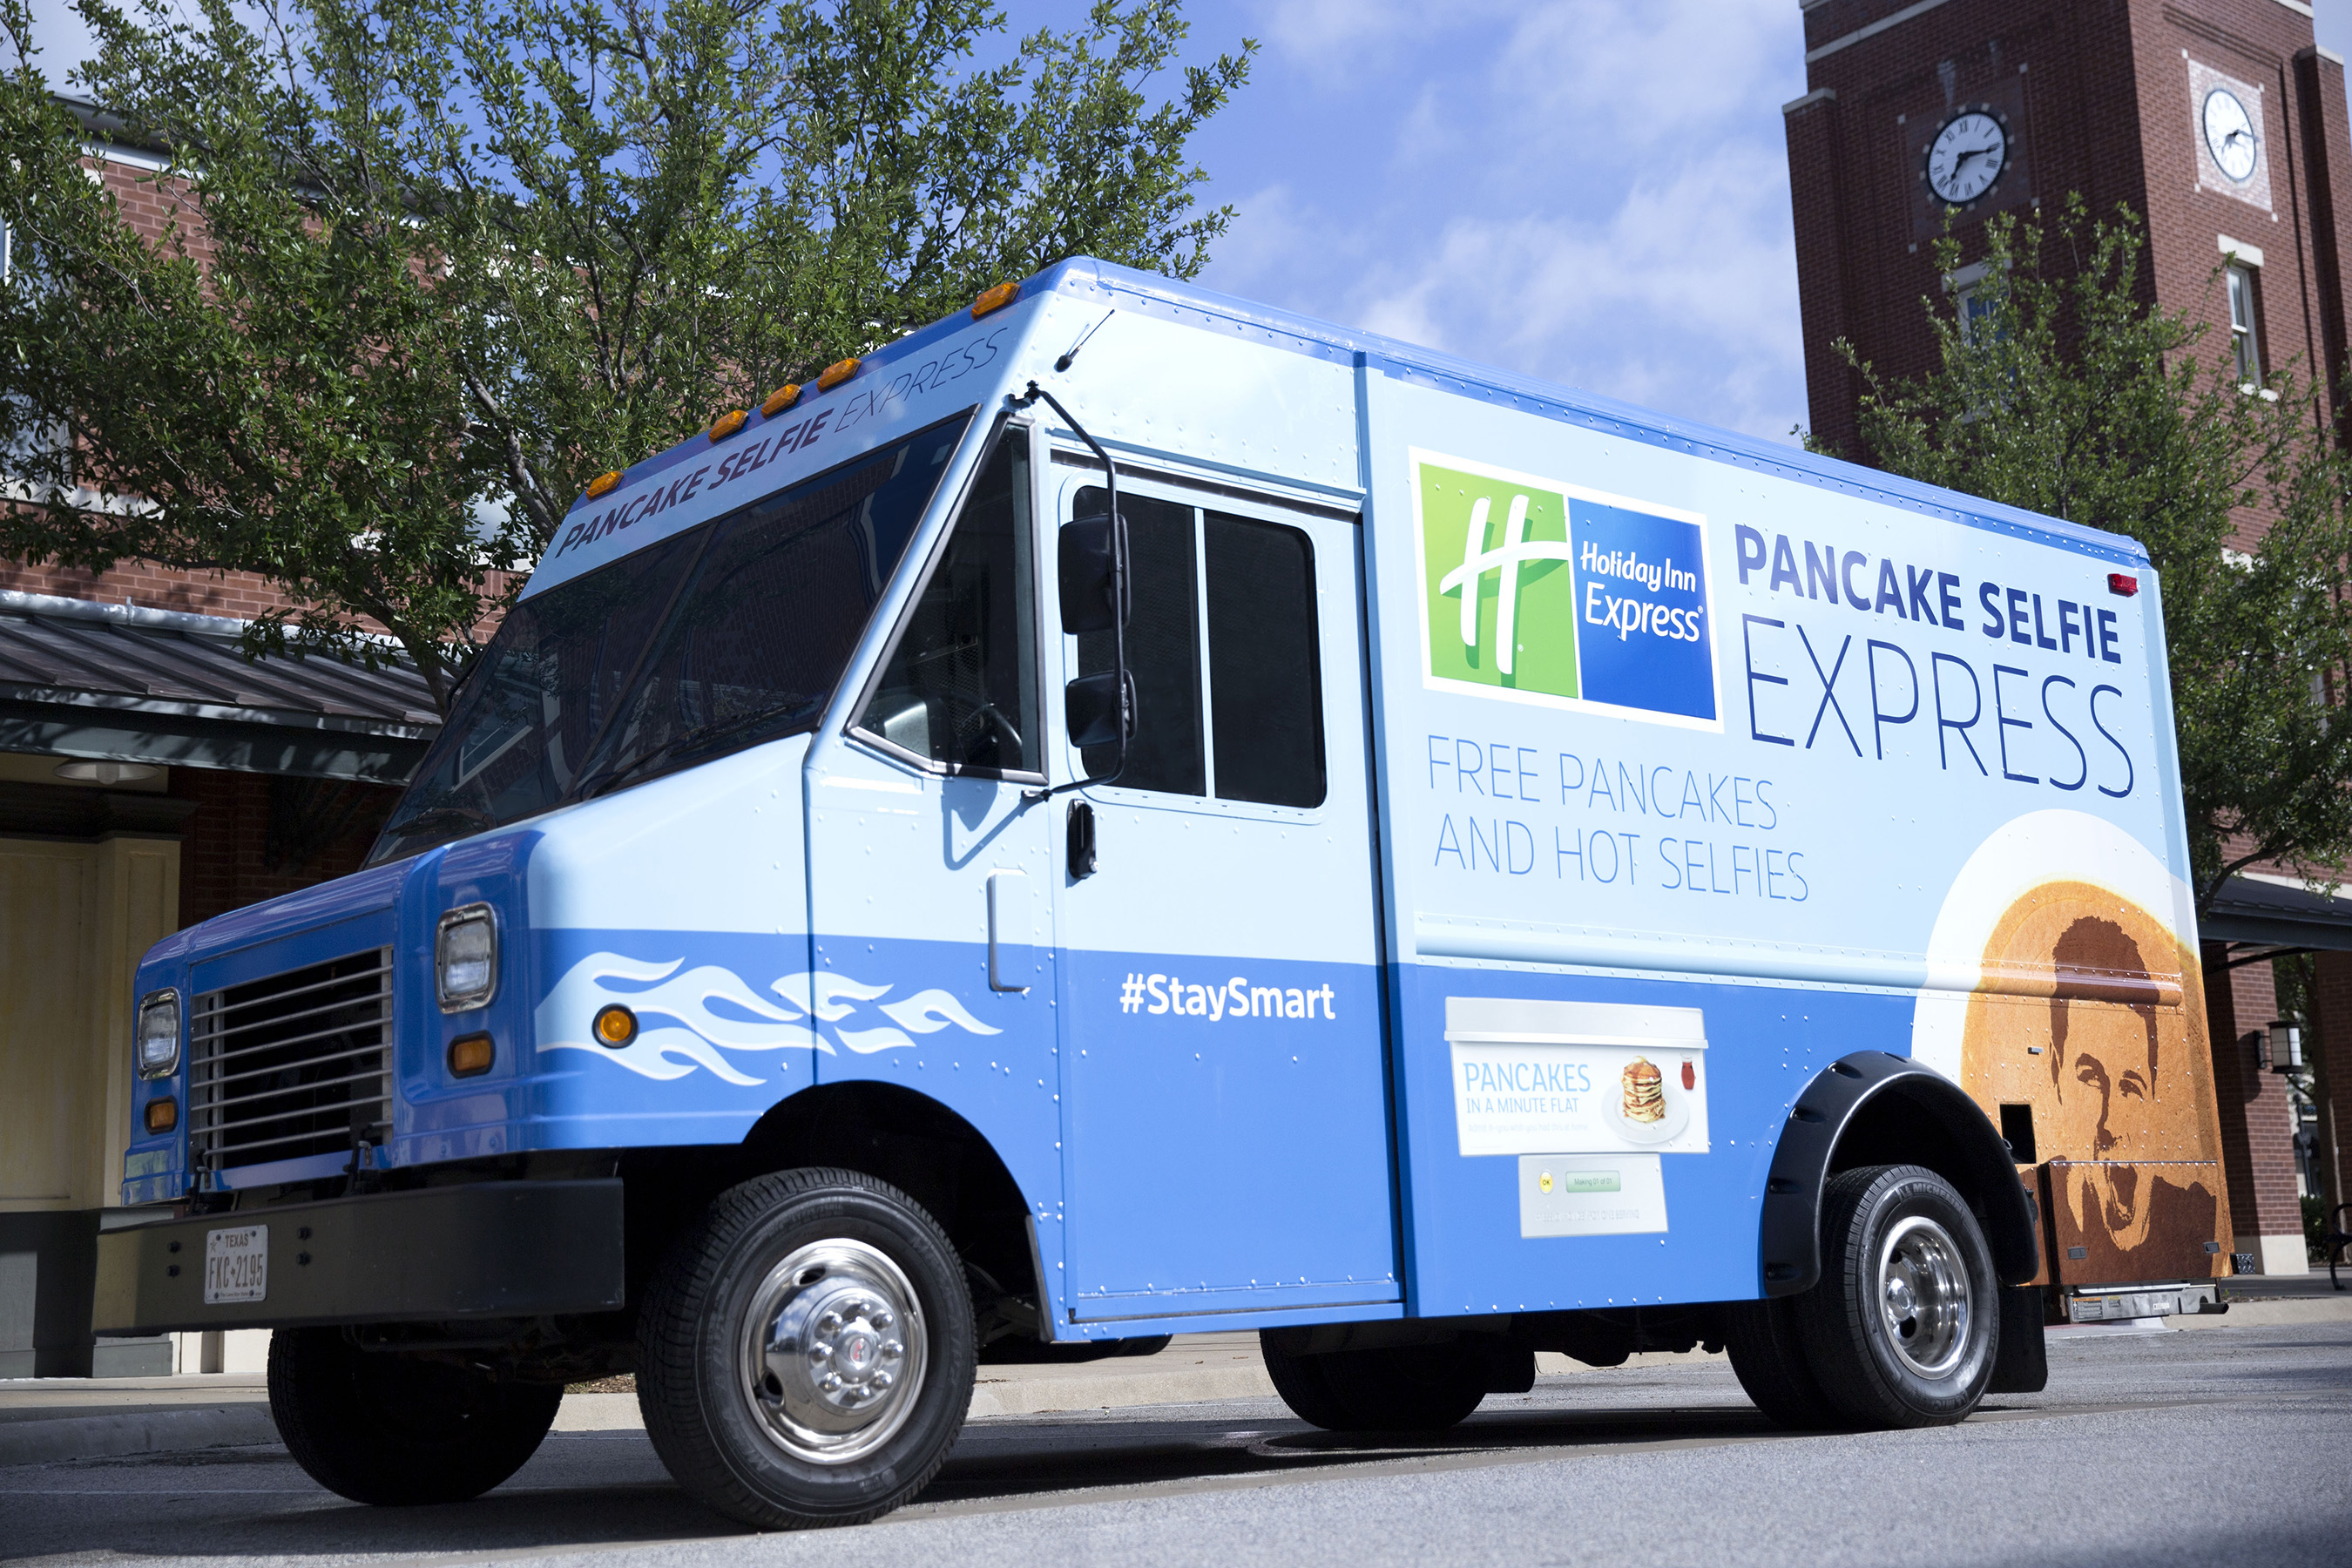 Holiday Inn Express® brand announces Pancake Selfie Express mobile breakfast tour on select Southeastern Conference football games this fall